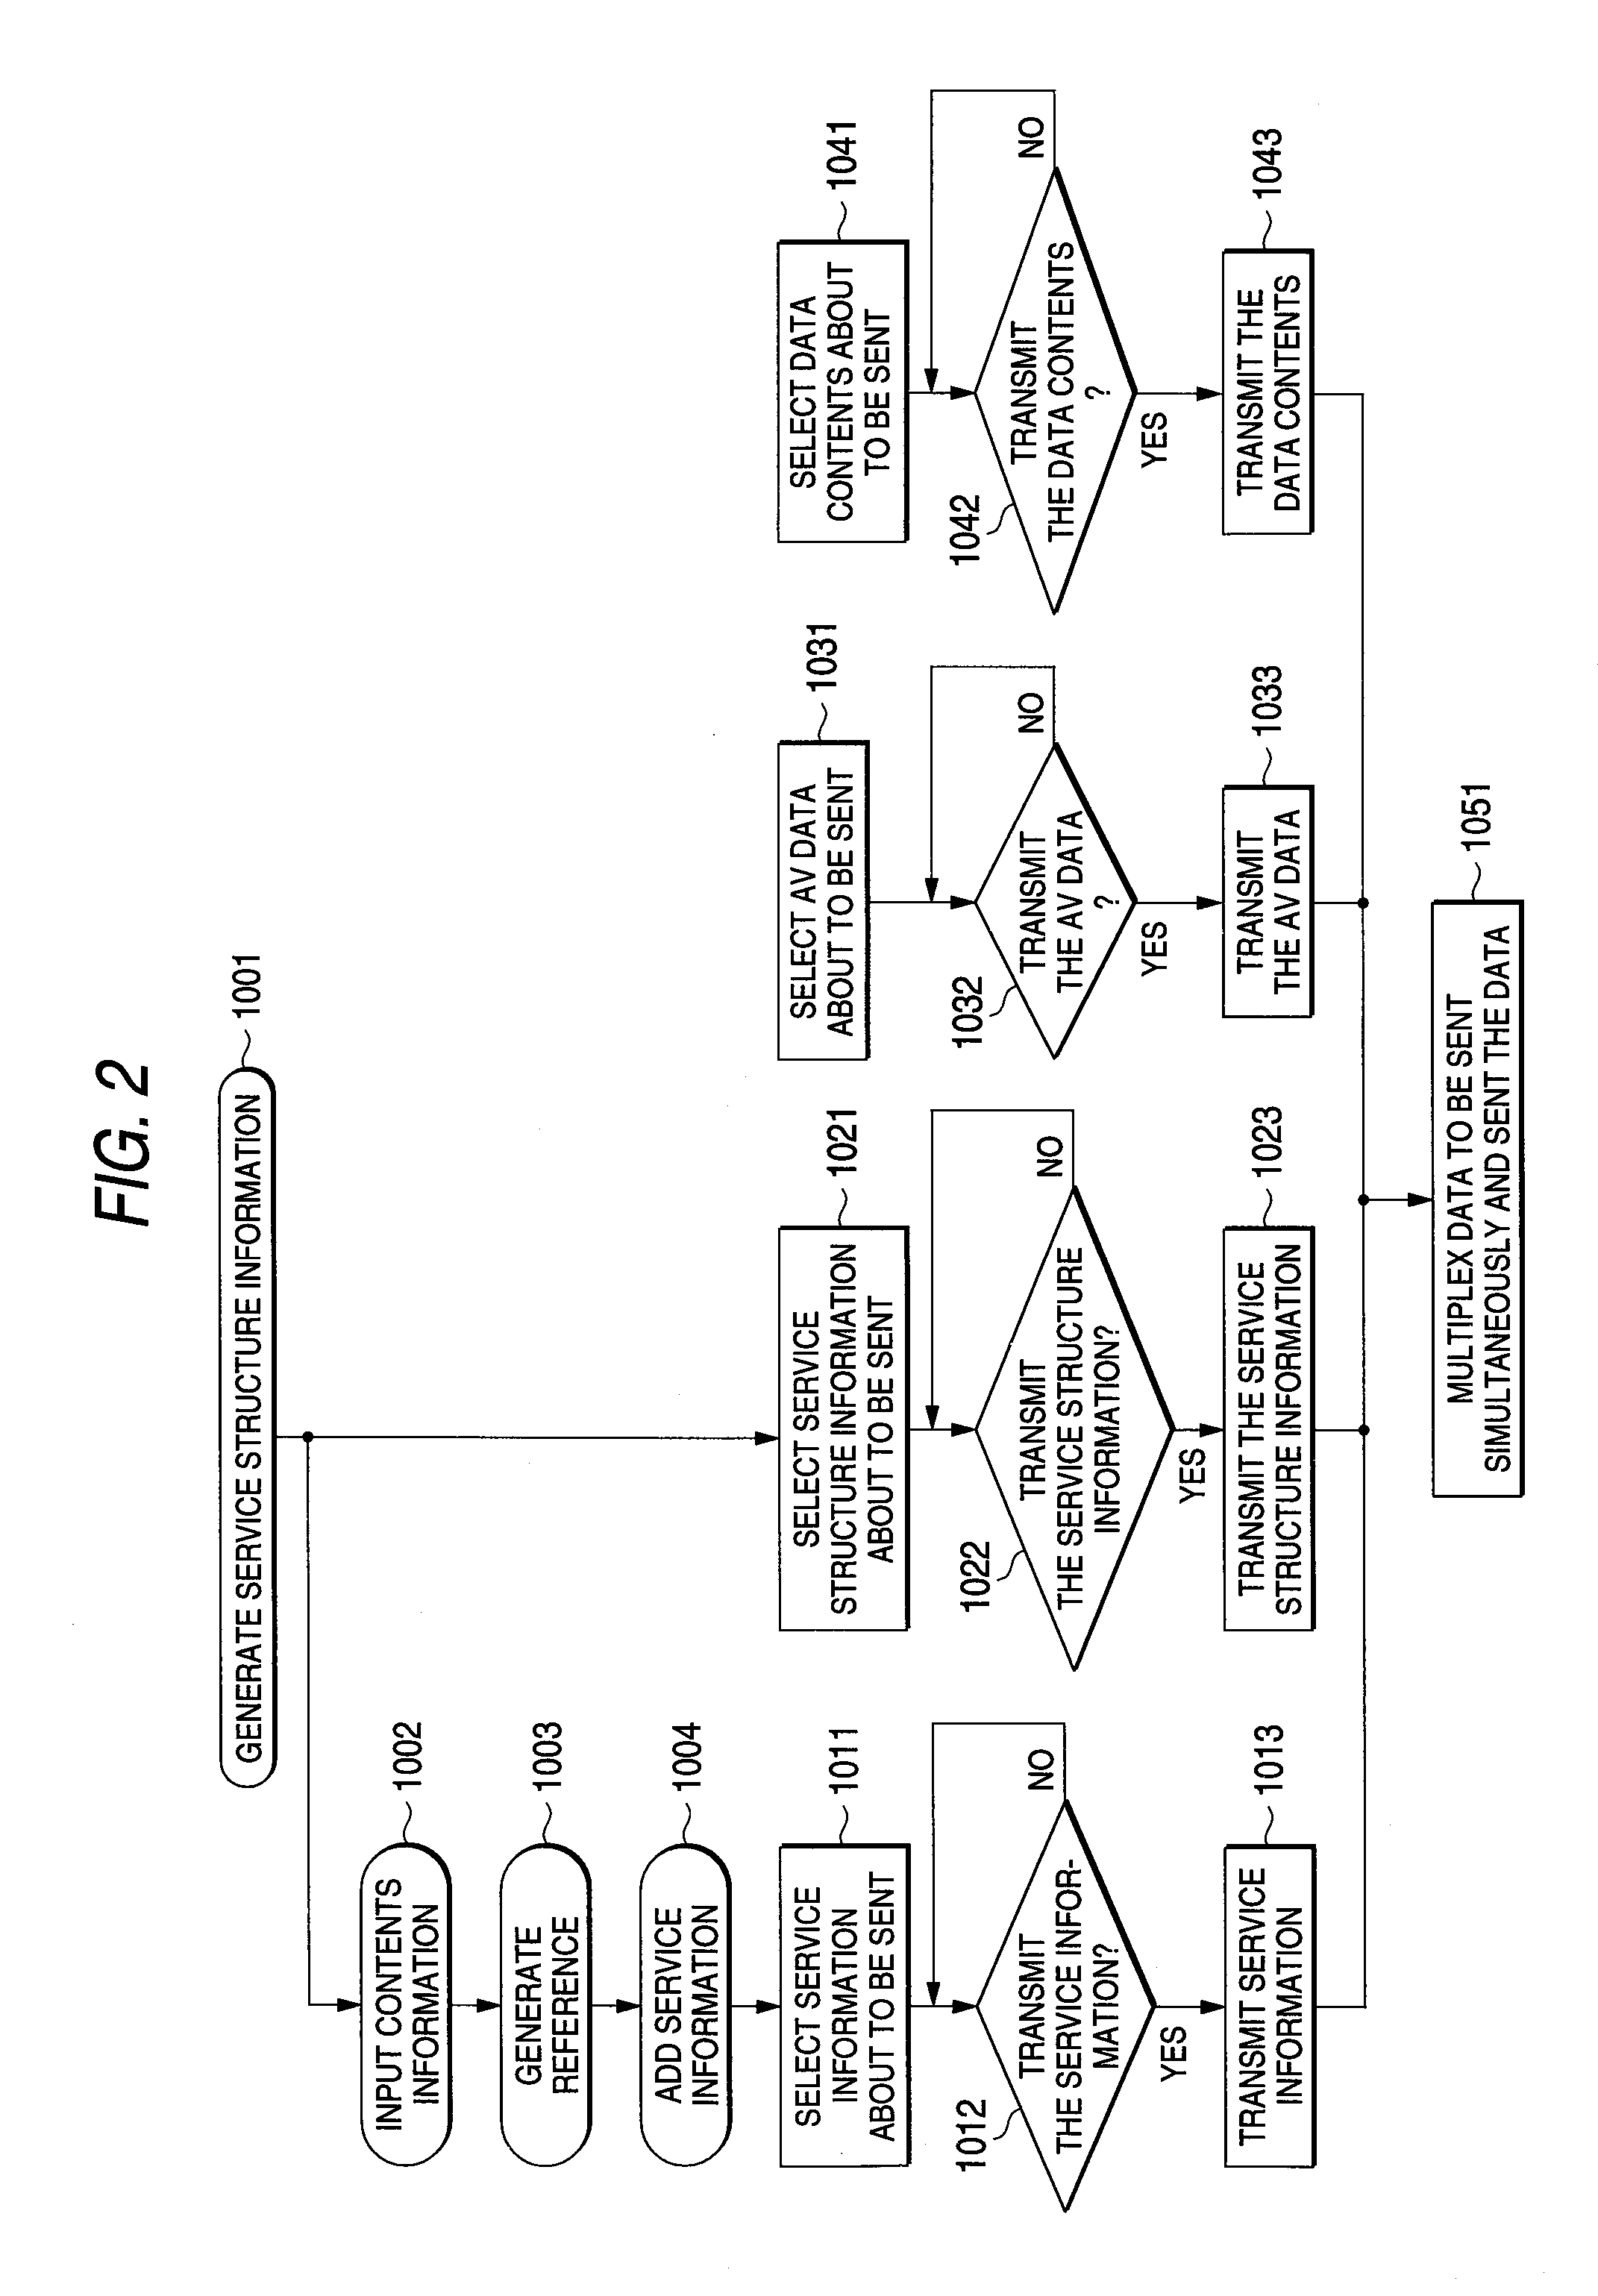 Storage type broadcast system, transmitter and receiver